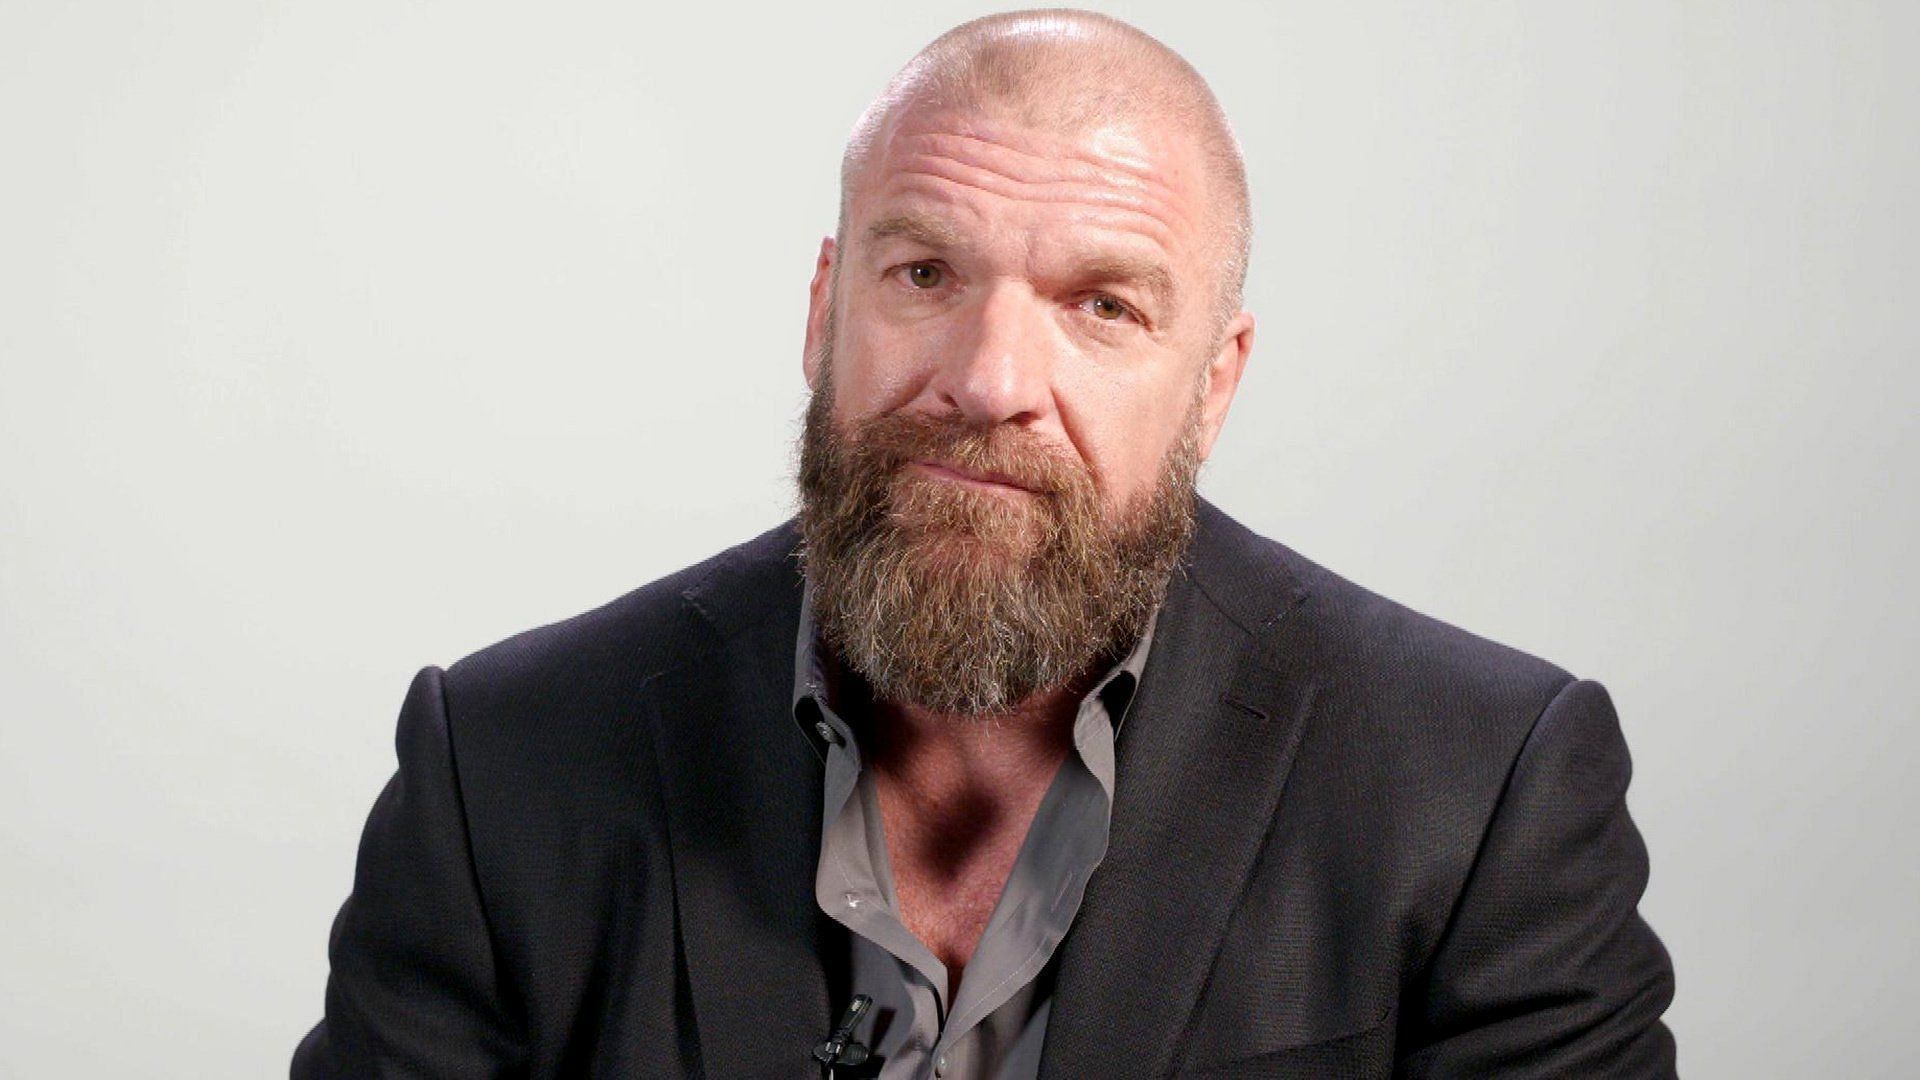 WWE Chief Content Officer Triple H aka Paul Levesque speaks to the fans